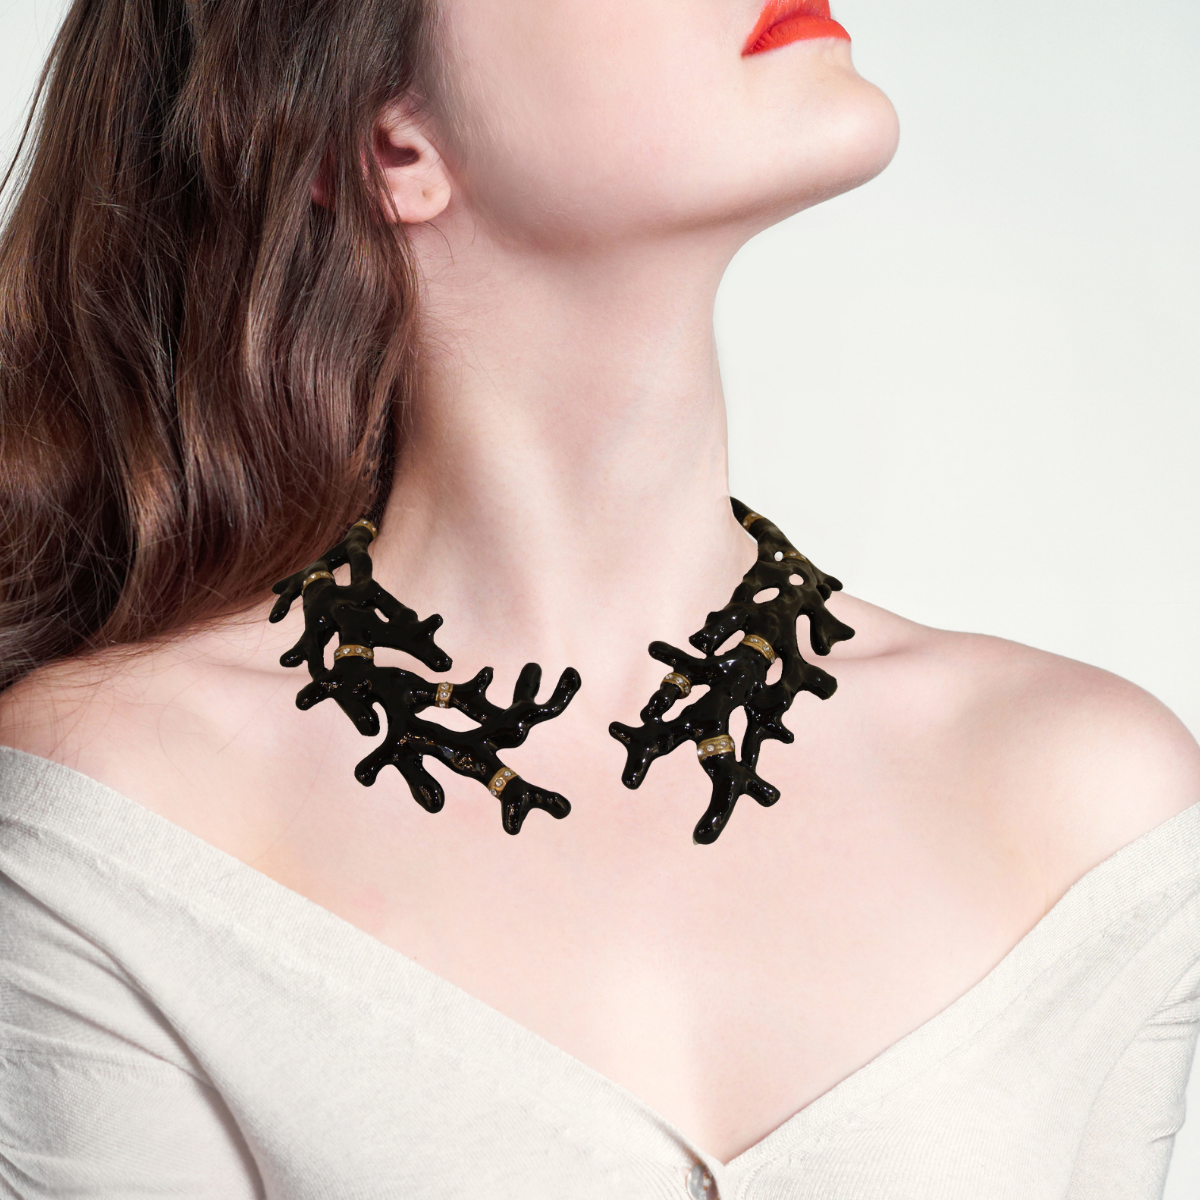 Necklace coral-shaped black